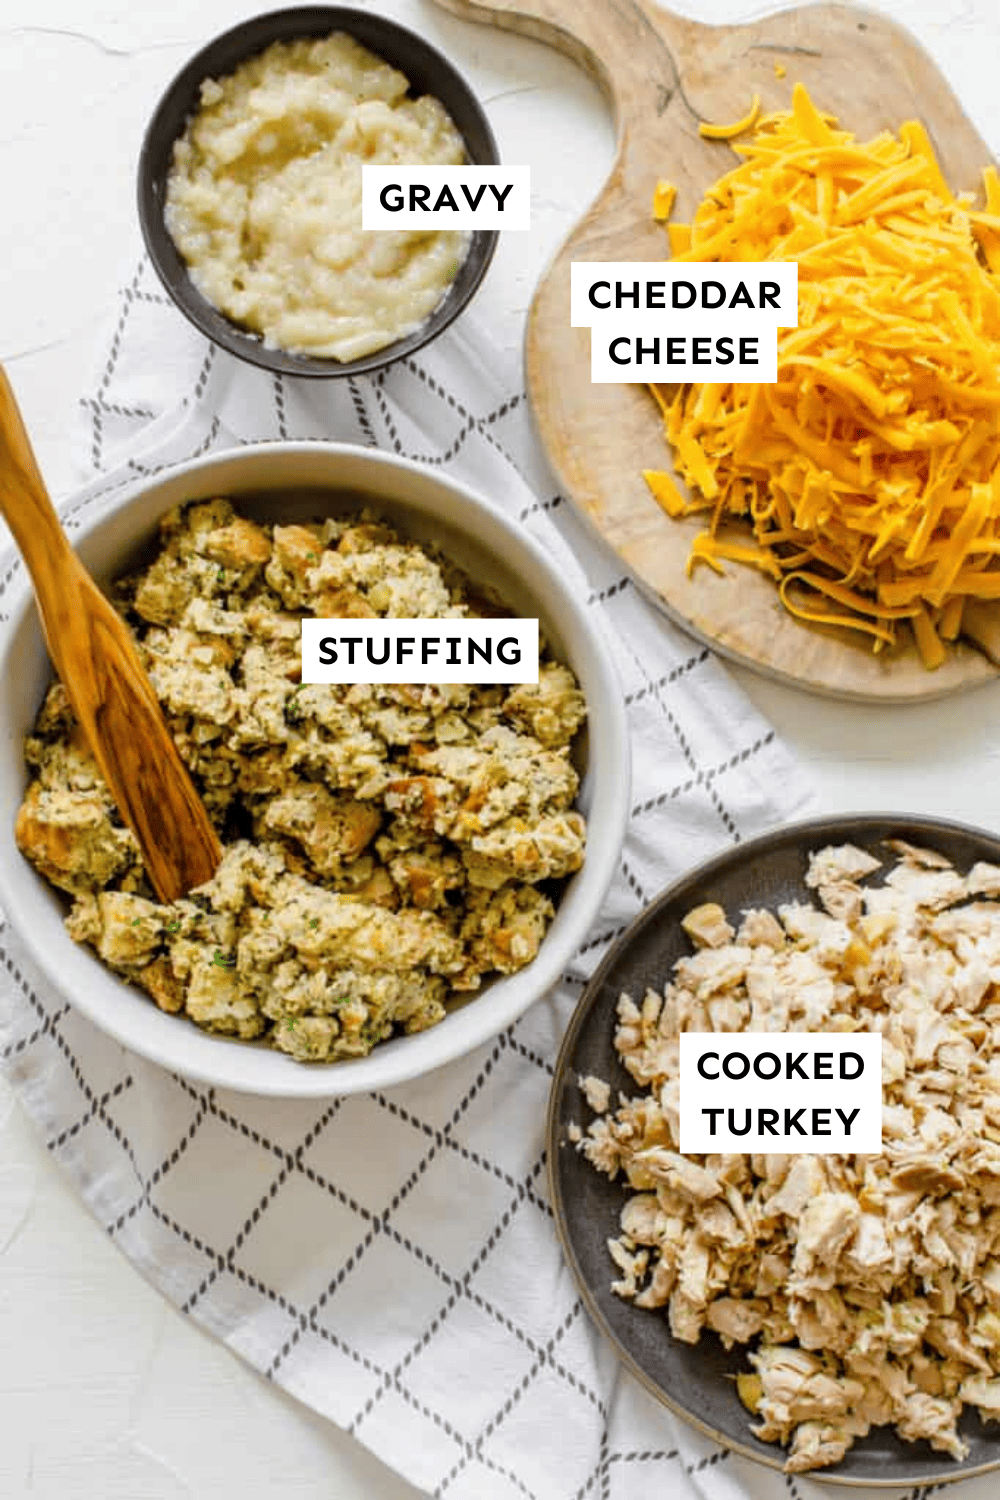 Turkey stuffing casserole ingredients (chopped turkey, gravy, cheddar cheese, and stuffing) measured into bowls and labeled.